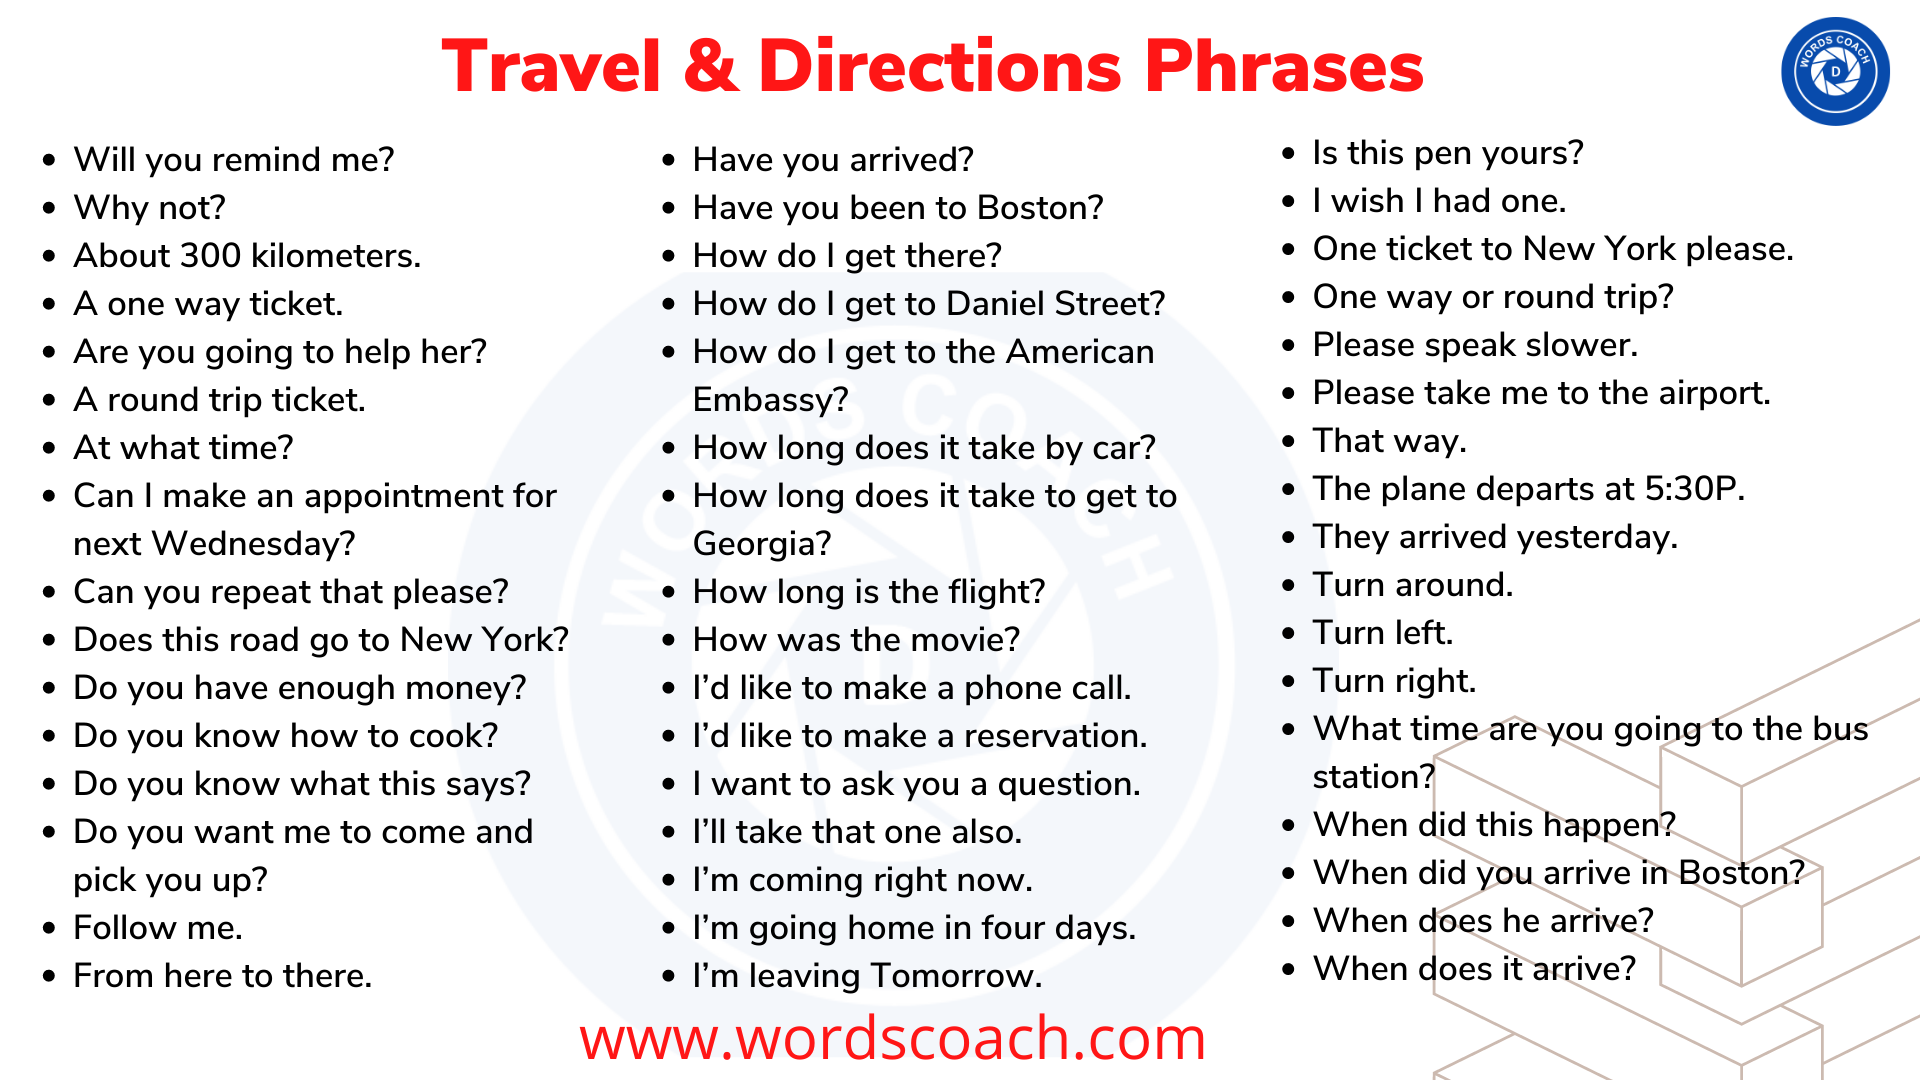 Travel & Directions Phrases